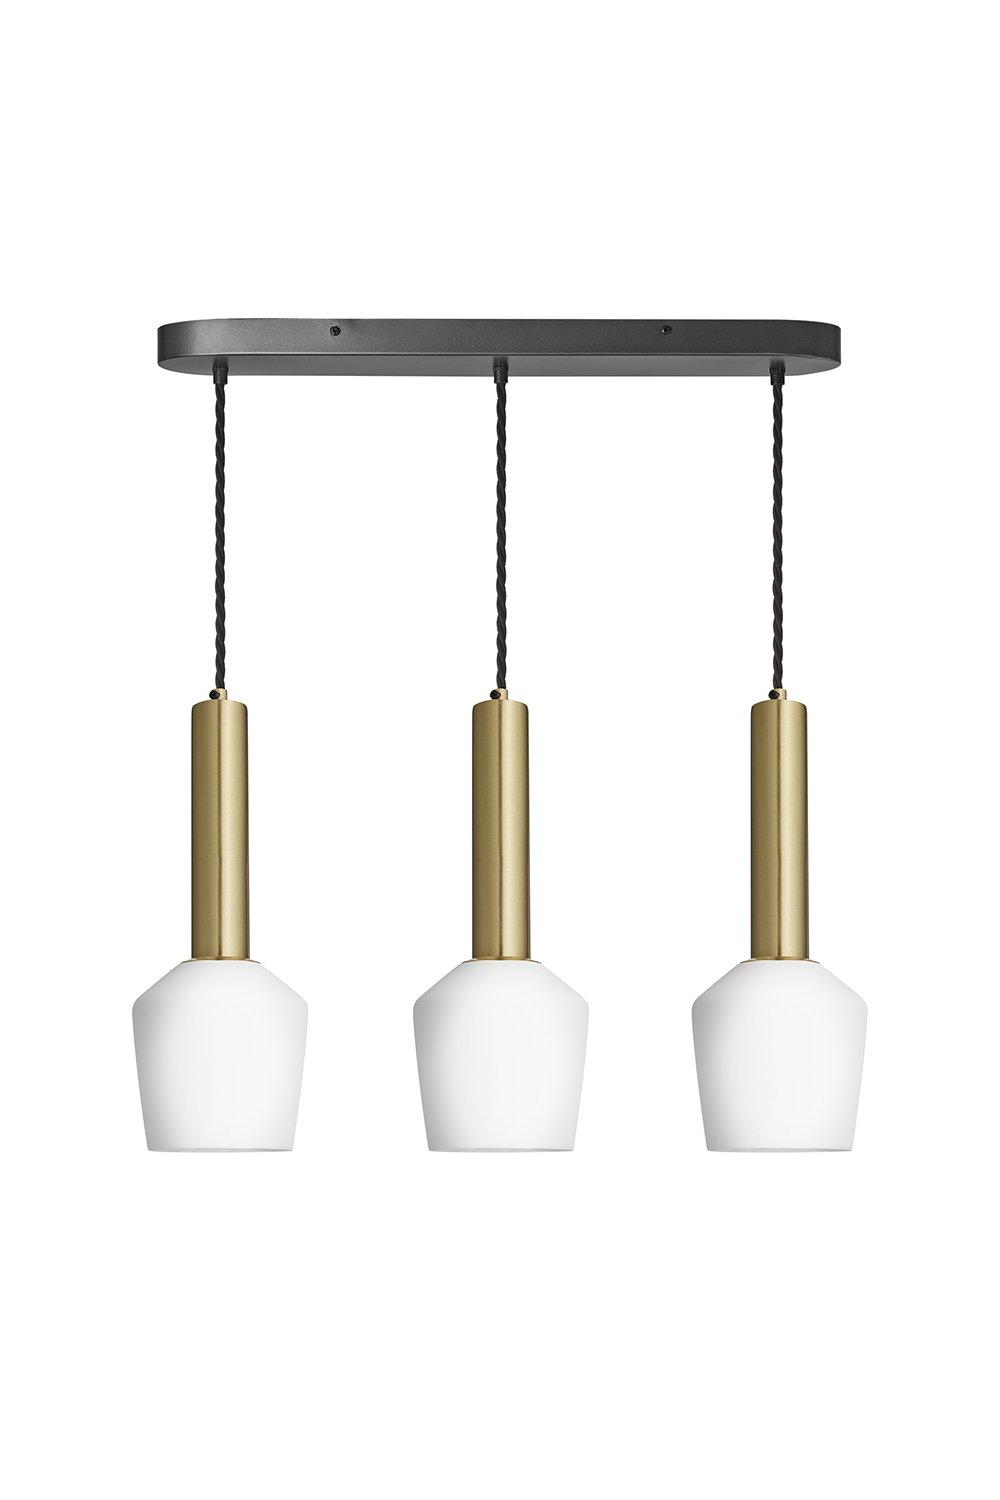 Sleek Cylinder Opal Glass Schoolhouse 3 Wire Oval Cluster Lights, 5.5 inch, White, Brass holder